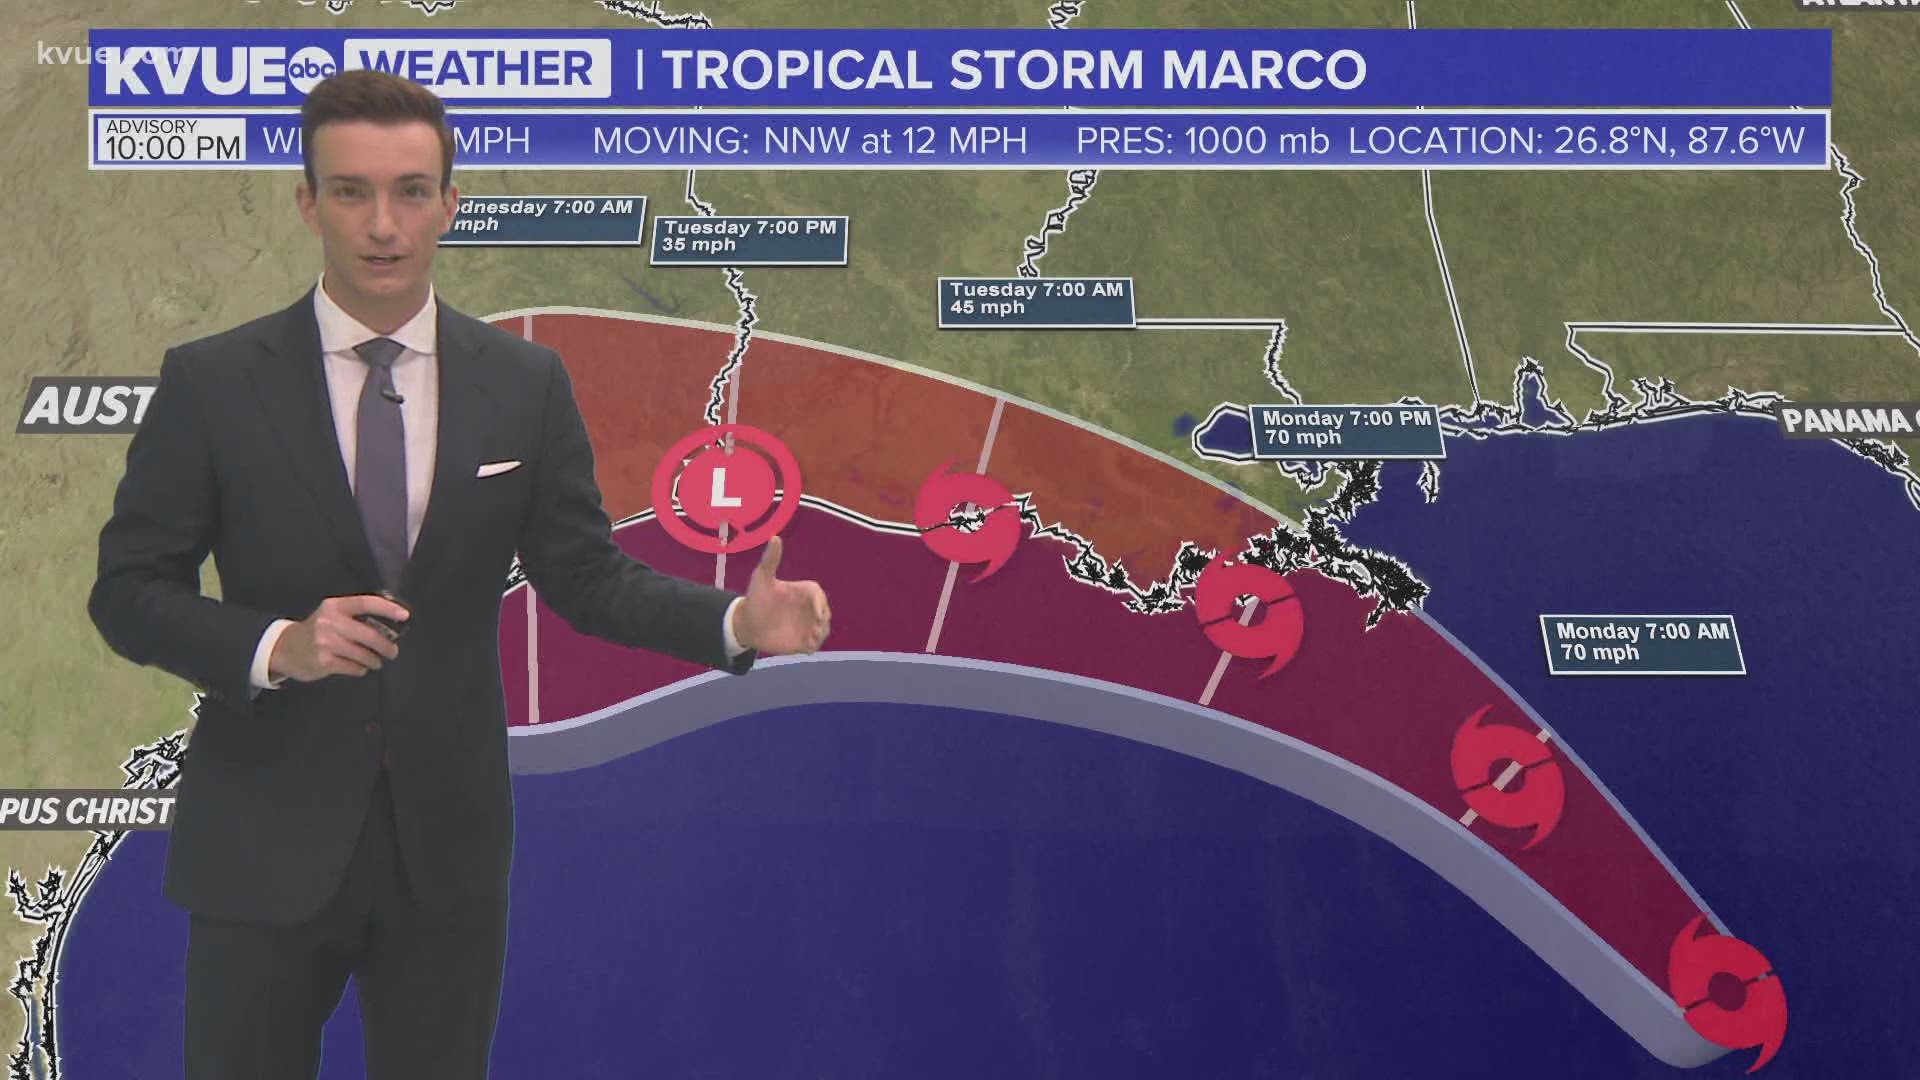 Marco expected to weaken over southeast Texas